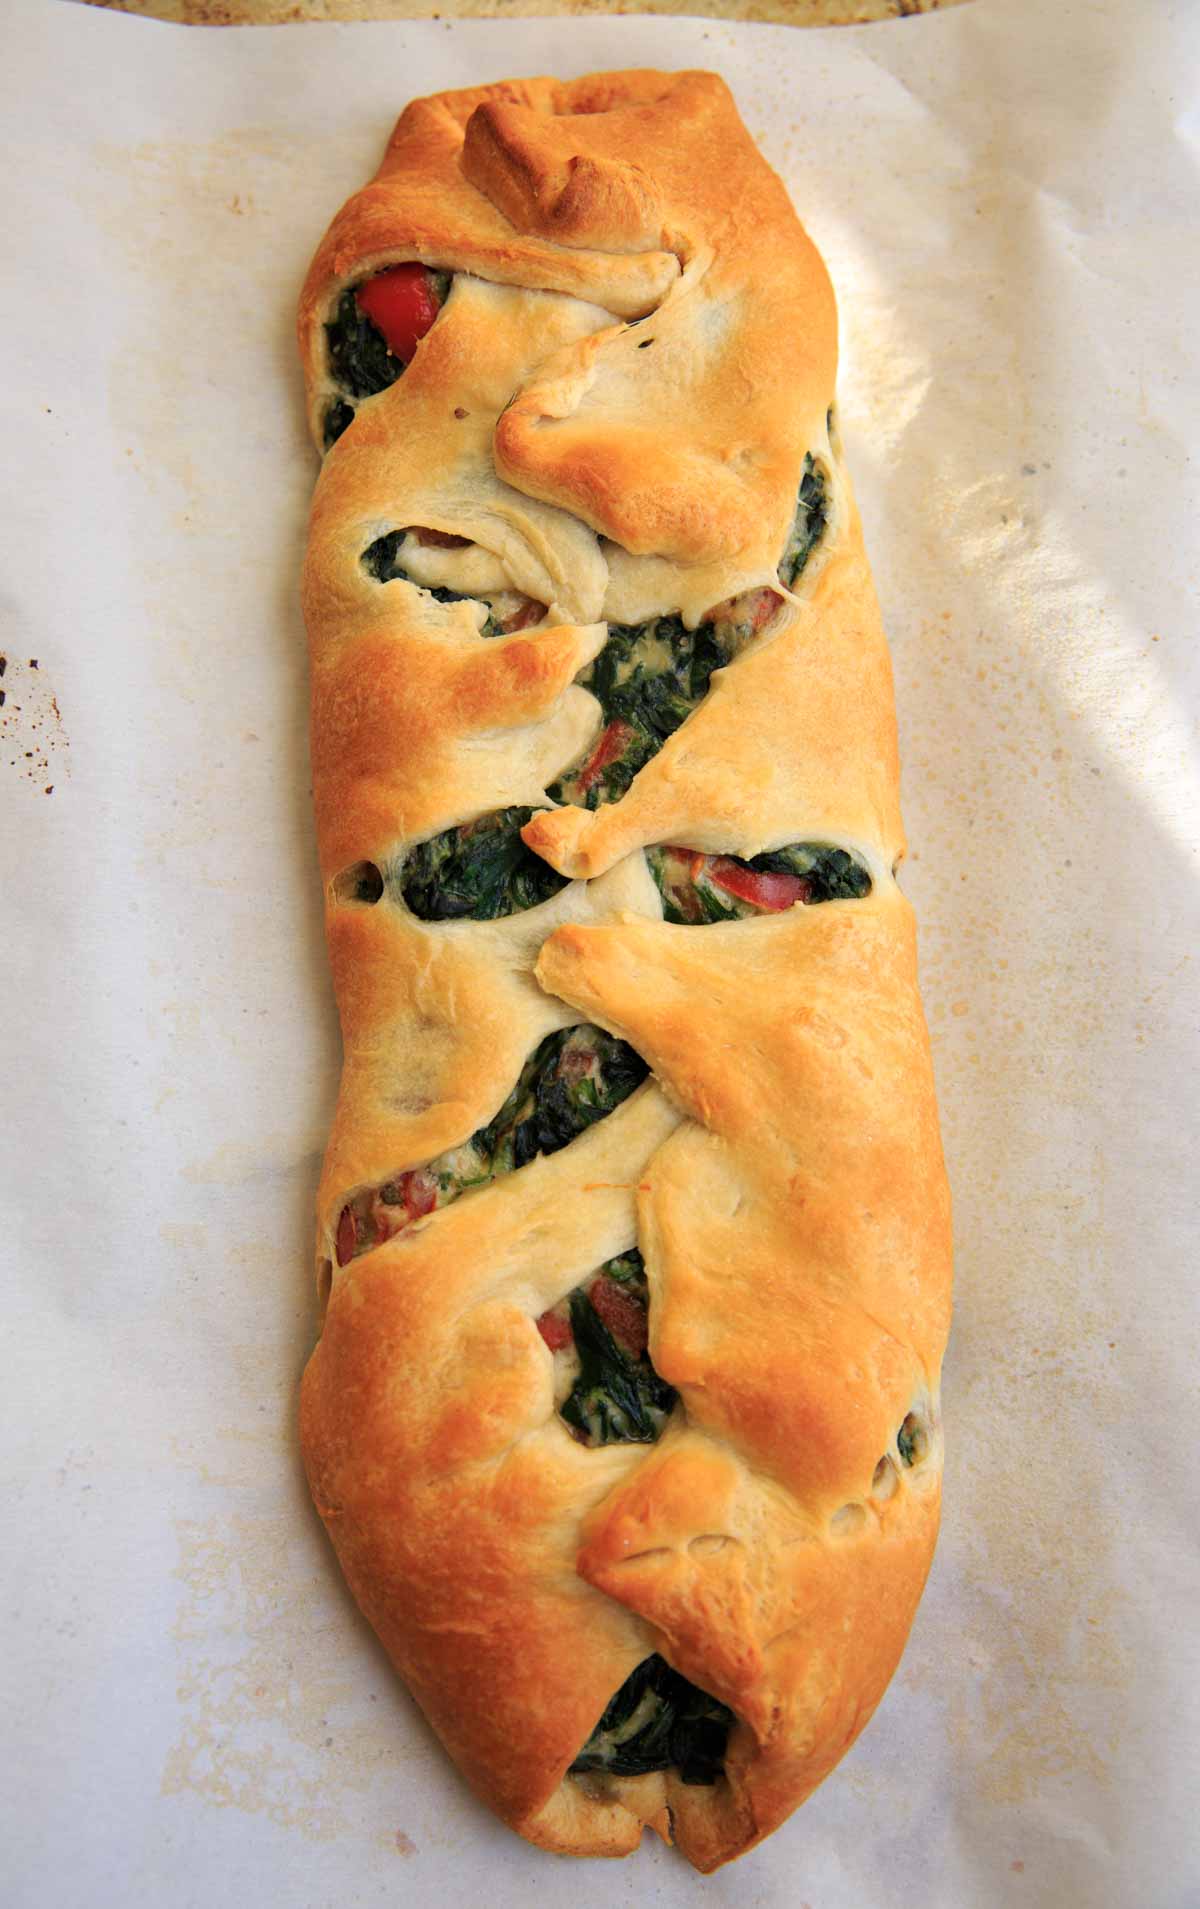 Baked and braided spinach ricotta mixture on crescent wrap - Spinach Ricotta Crescent Wrap